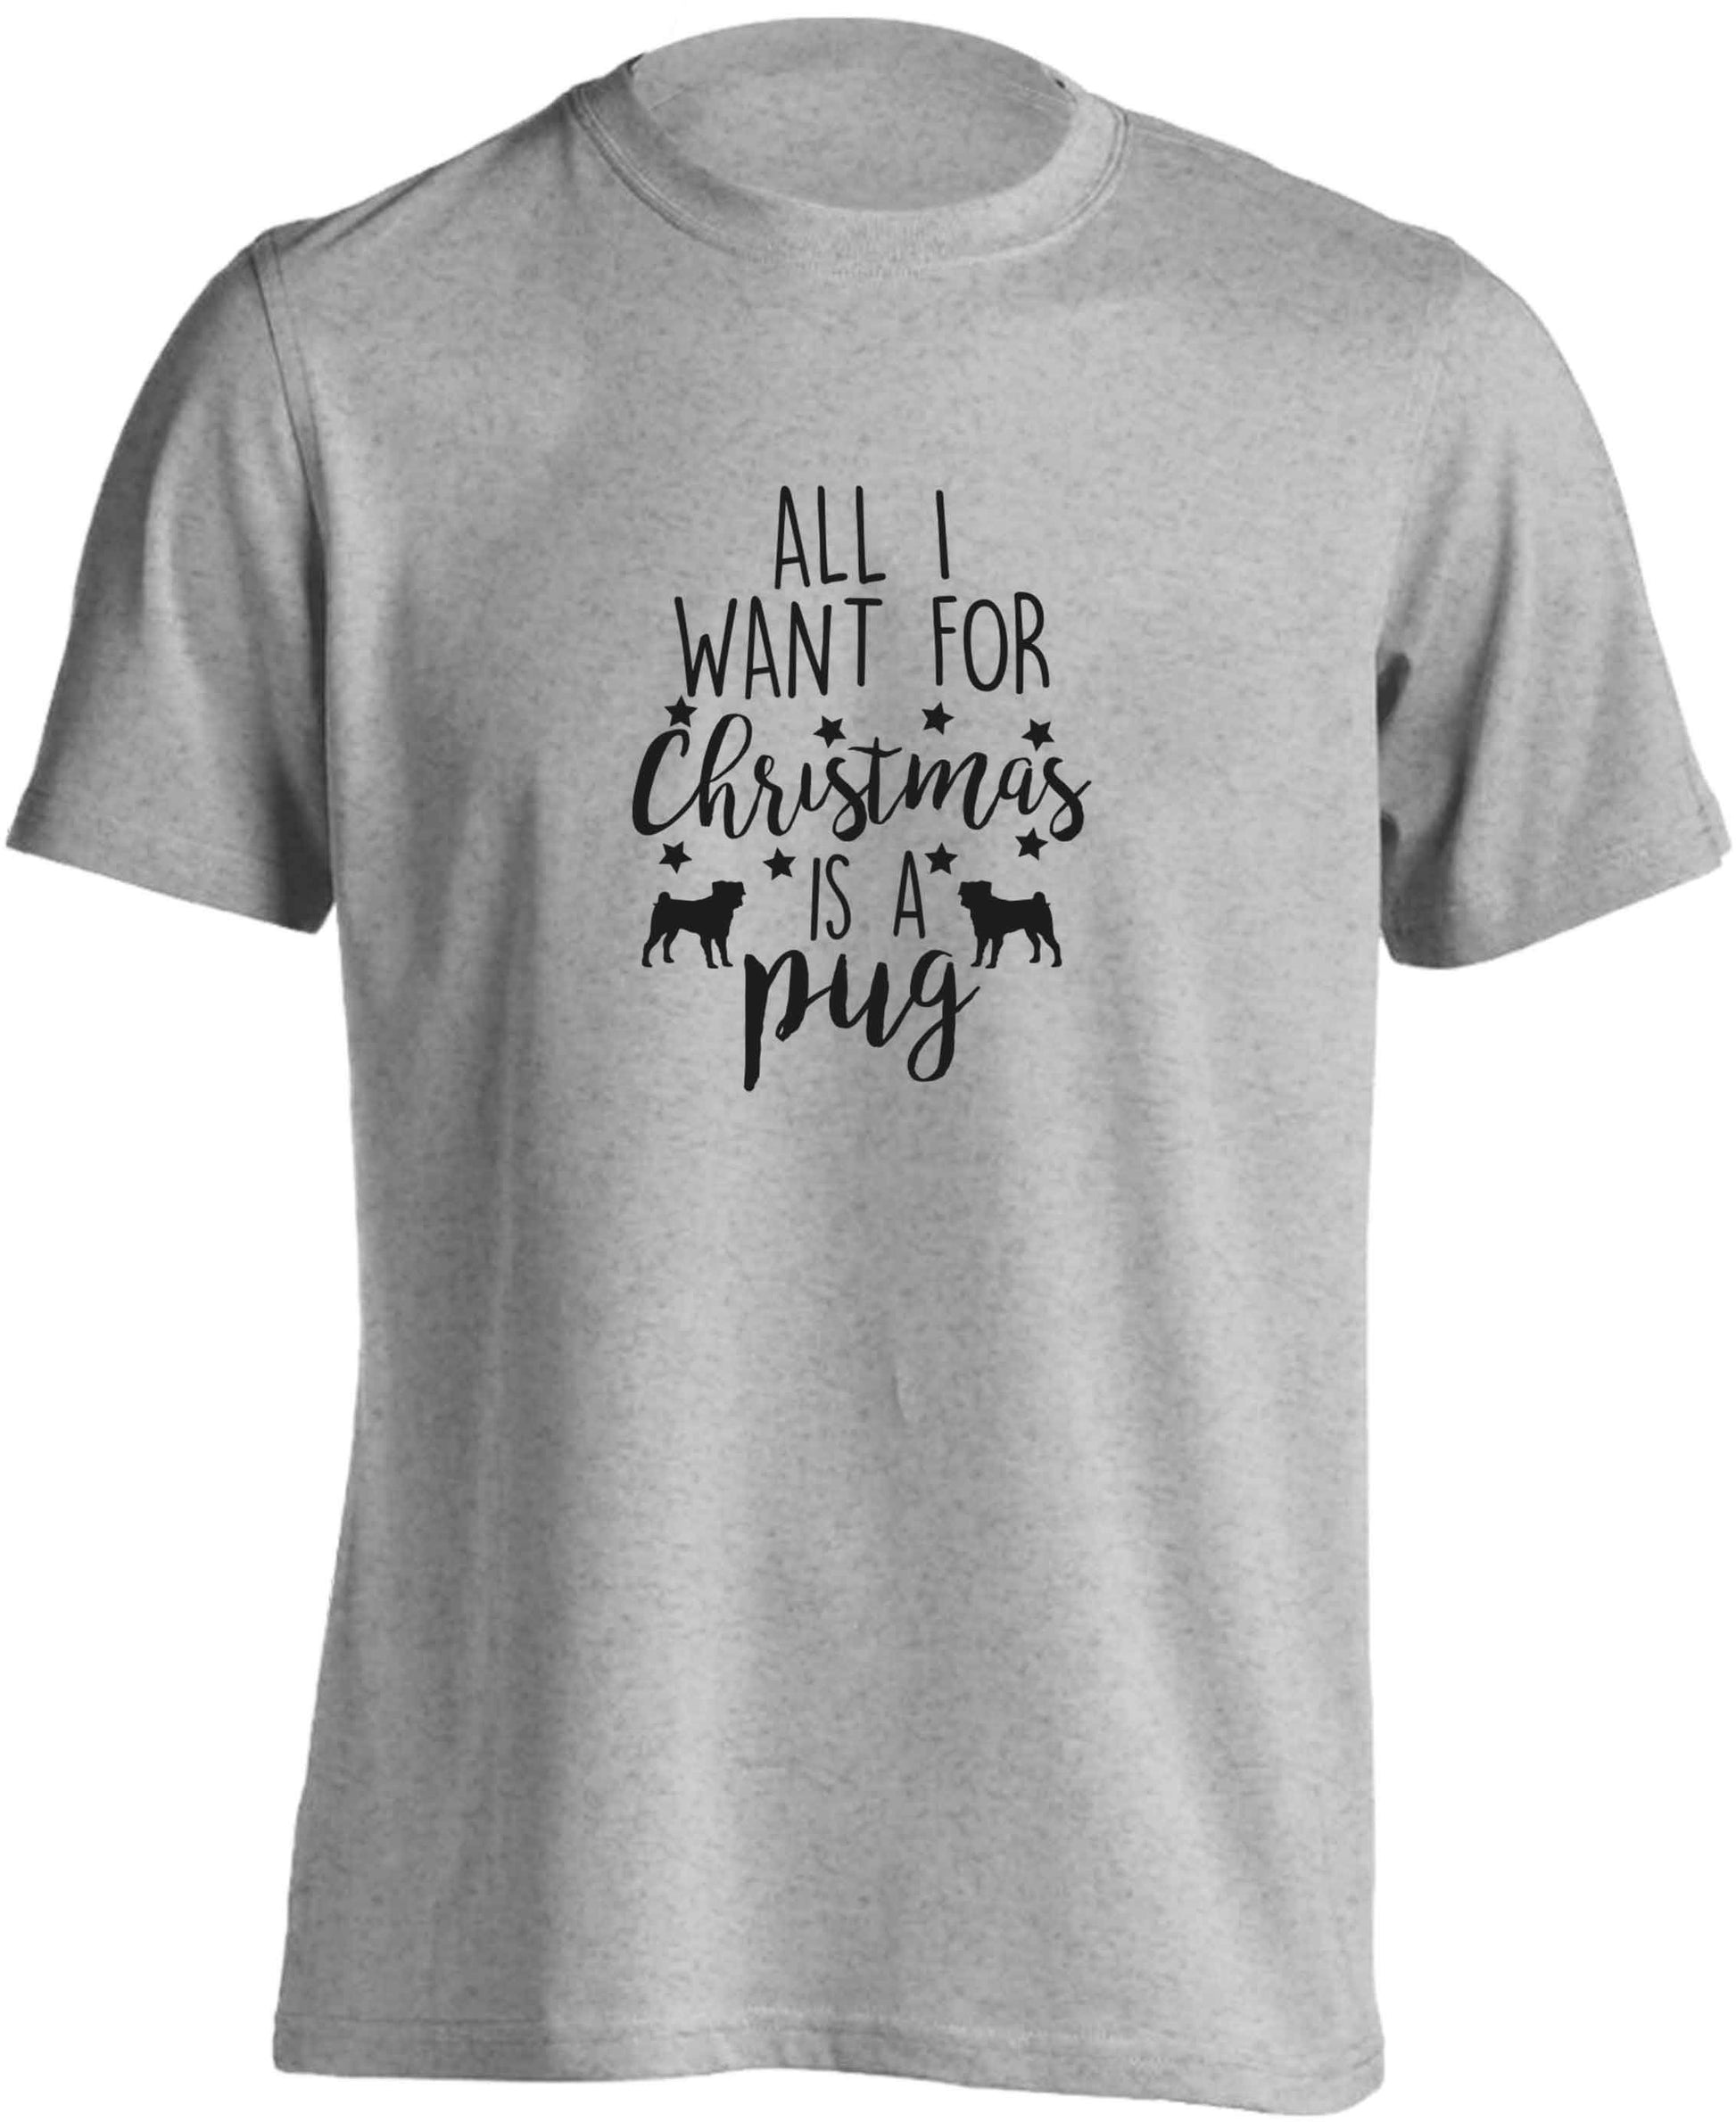 All I want for Christmas is a pug adults unisex grey Tshirt 2XL